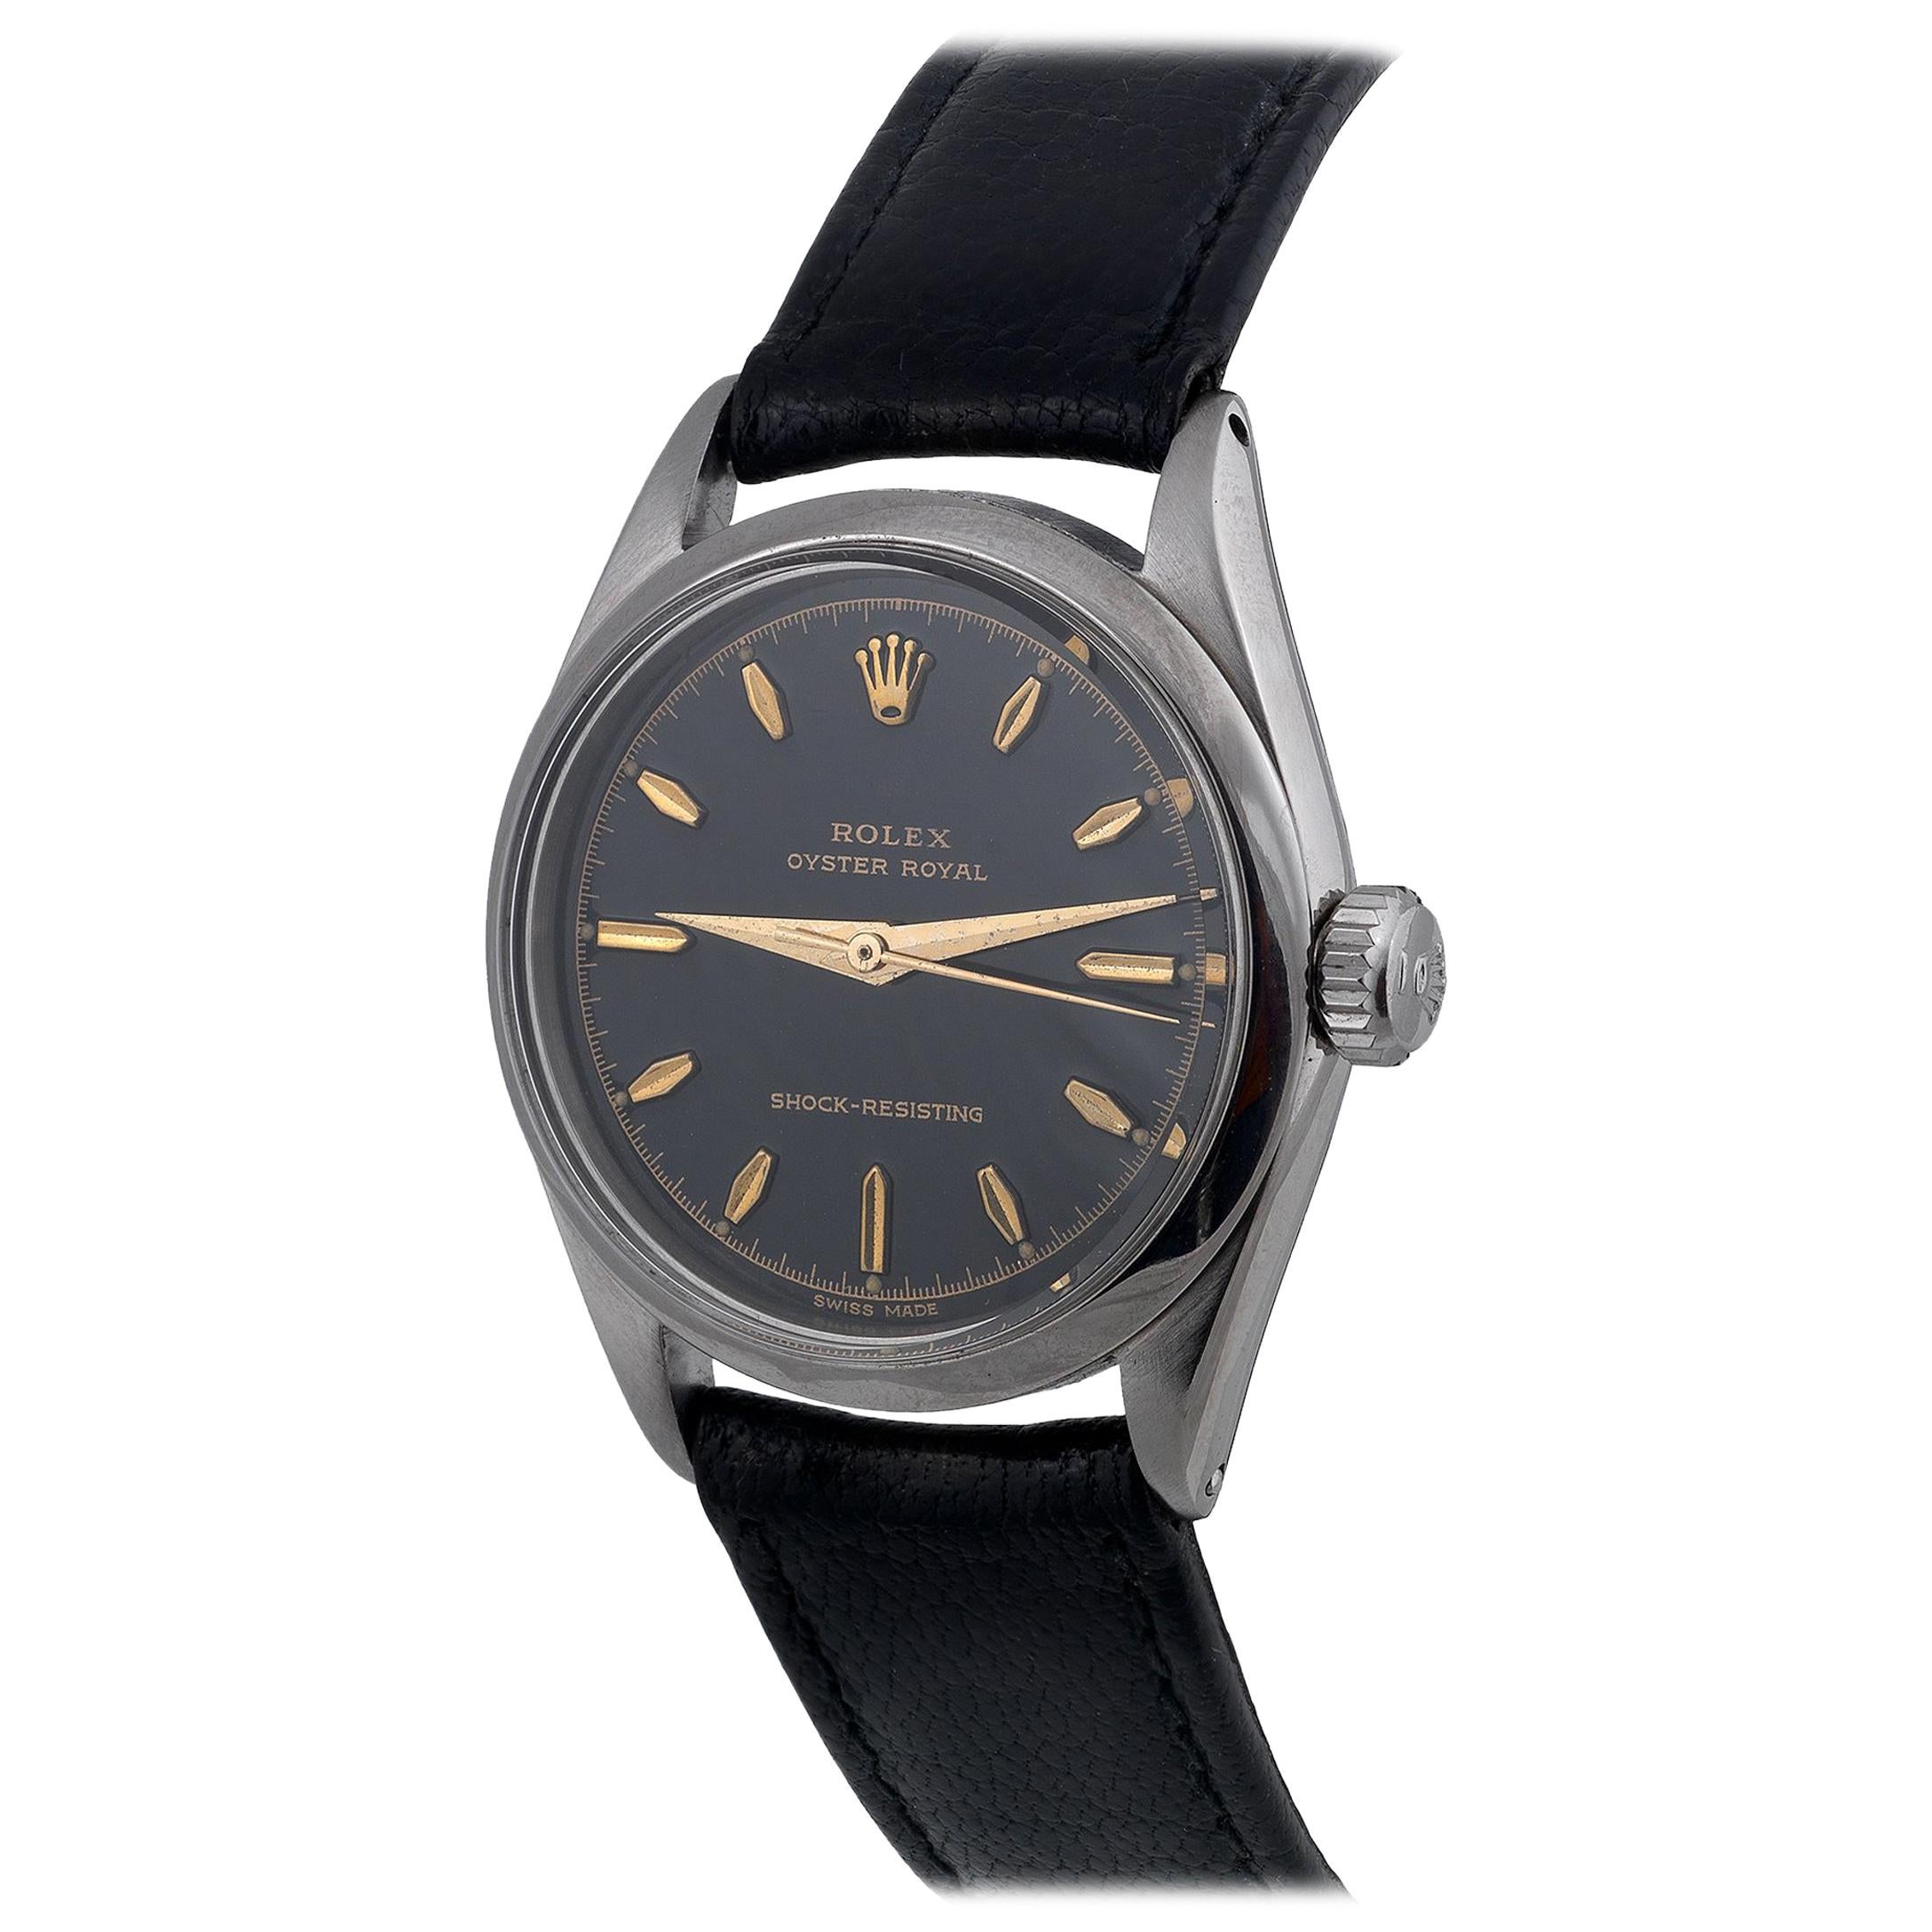 Tangle dreng Er Rolex Stainless Steel Oyster Royal manual wind wristwatch Ref 6444, circa  1956 at 1stDibs | rolex 6444 oyster royal, rolex oyster royal shock  resisting, 1956 rolex oyster perpetual